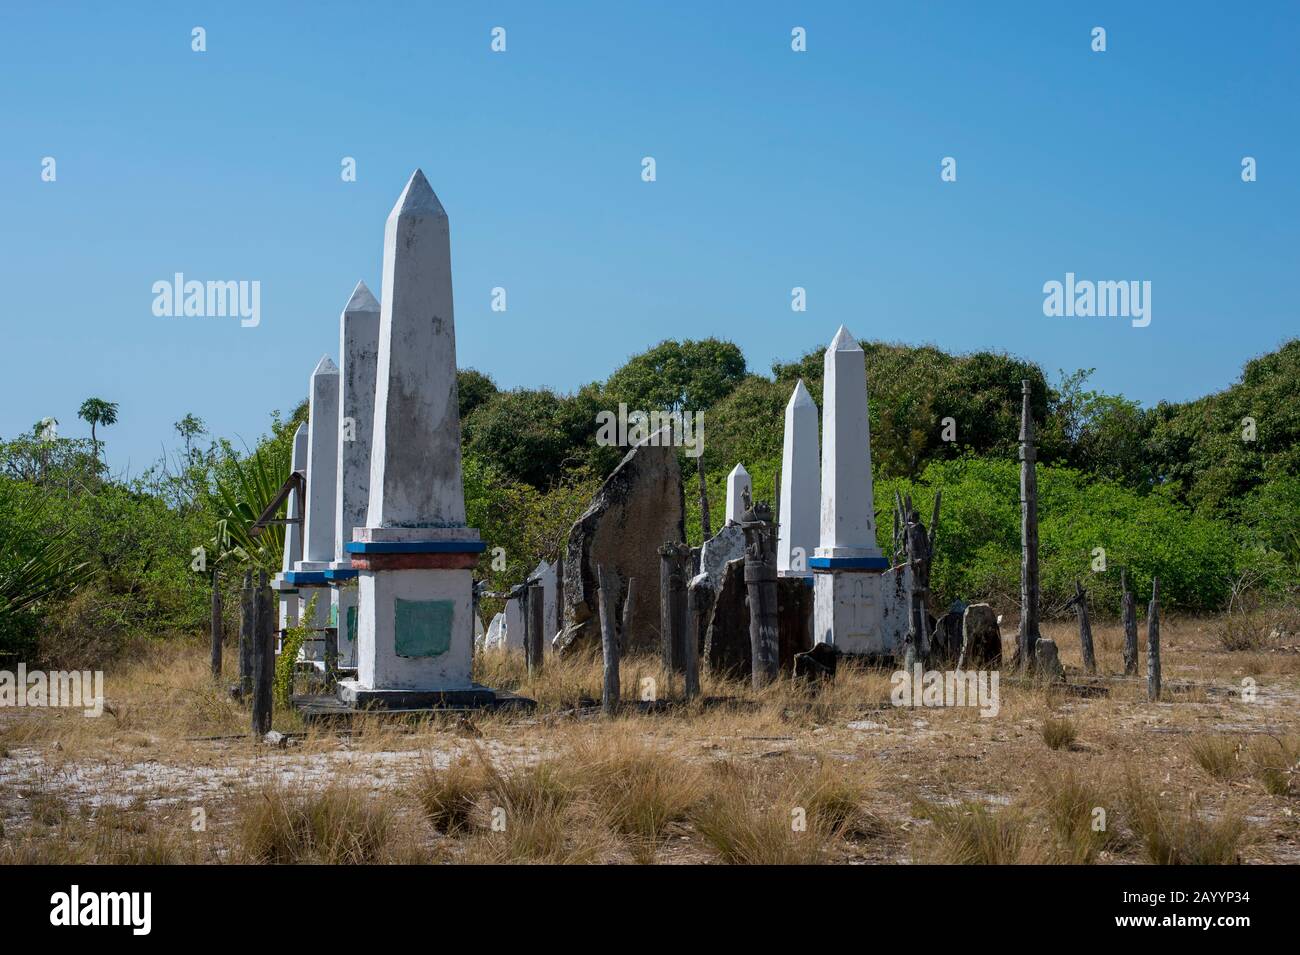 Antanosy cemetary with obelisks and wood sculptures as memorials for the dead near Fort Dauphin (Taolagnaro), a town on the southern coast of Madagasc Stock Photo